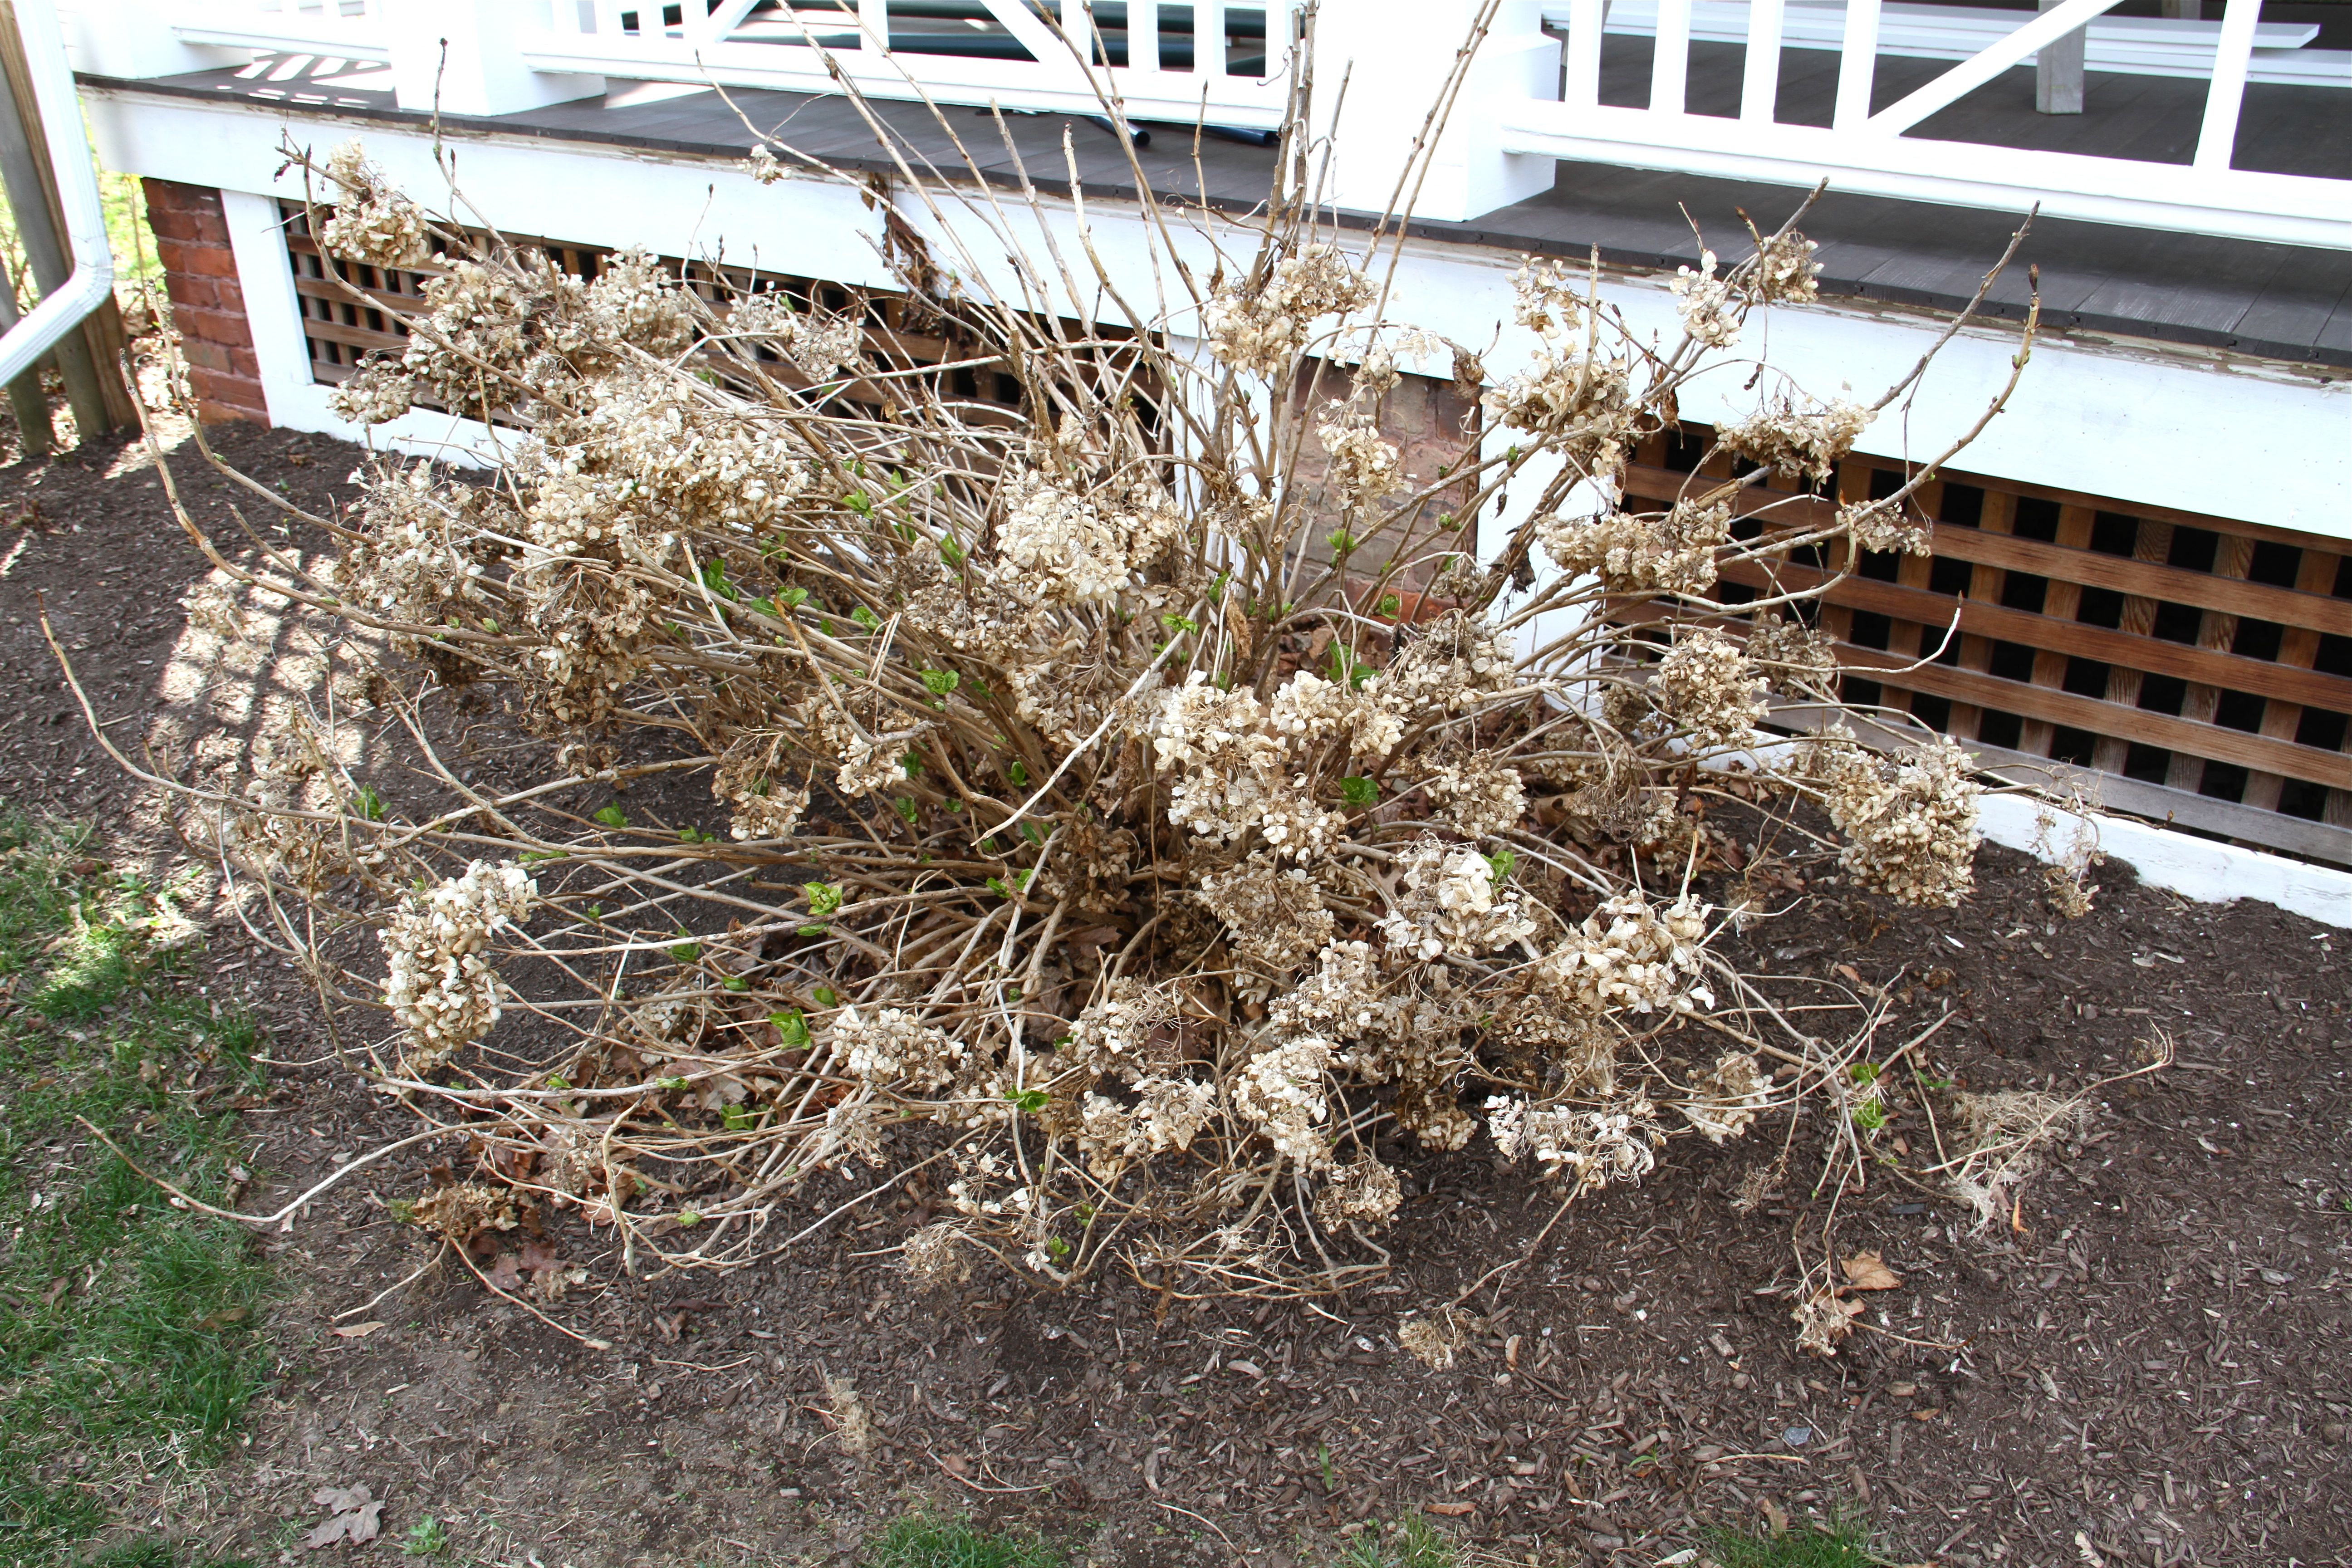 This is what the hydrangeas look like after a few months of winter (and a few weeks of spring). This one is a wedding hydrangea, and you can see the green leaves beginning to emerge from the tangled mess of last fall's leaves, dried blooms and broken stems.